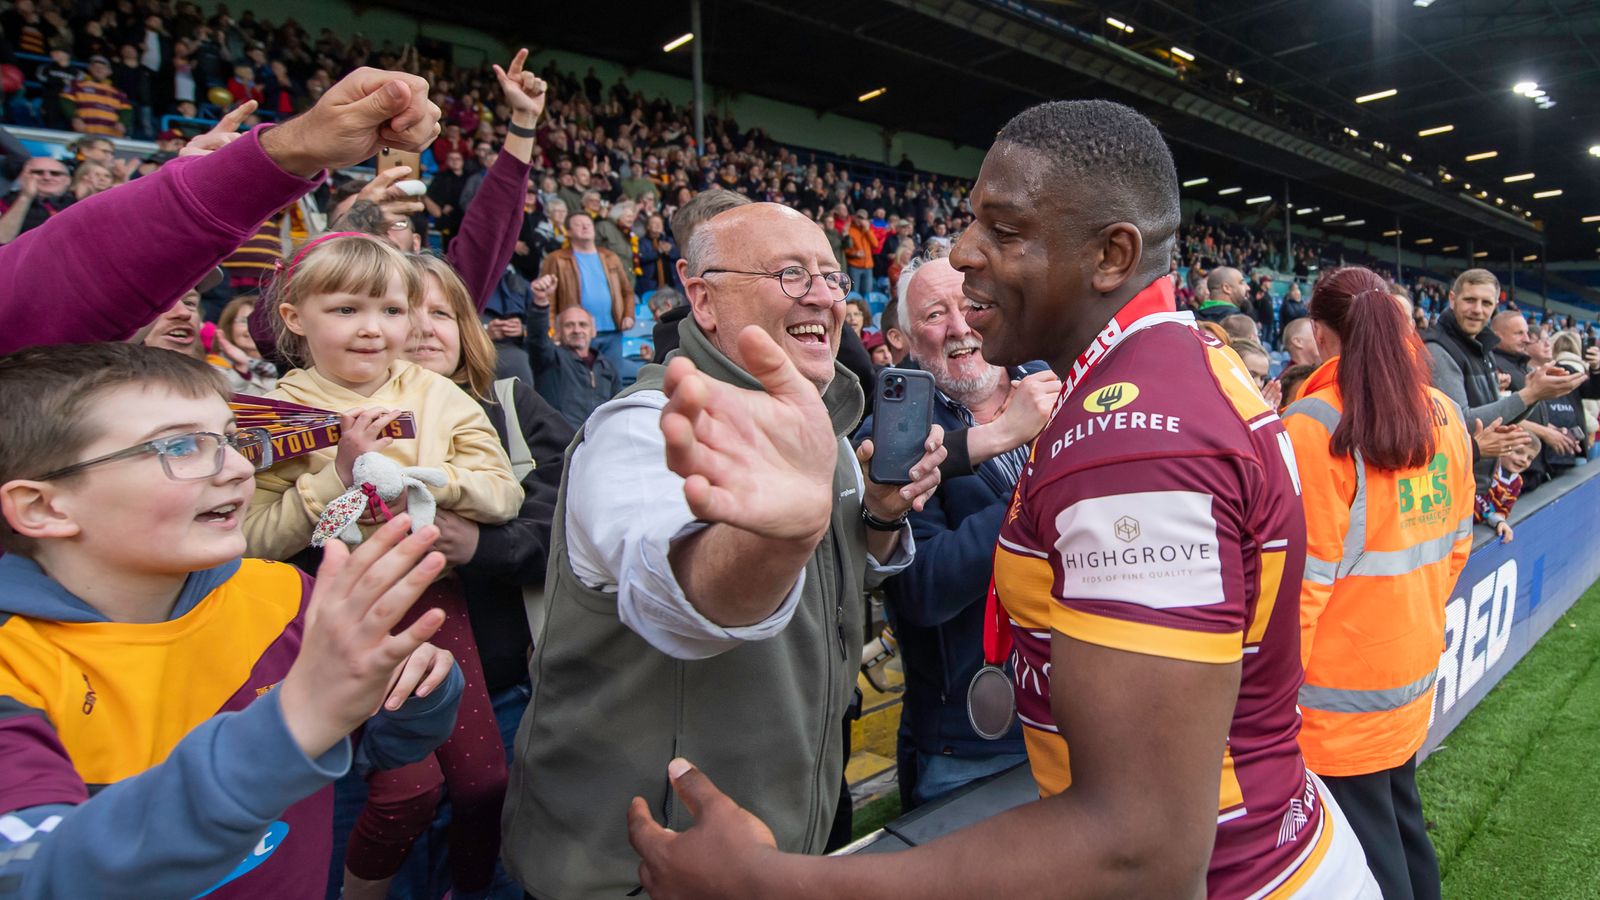 Challenge Cup final 2022: Huddersfield Giants aim to kickstart a weekend to remember in West Yorkshire